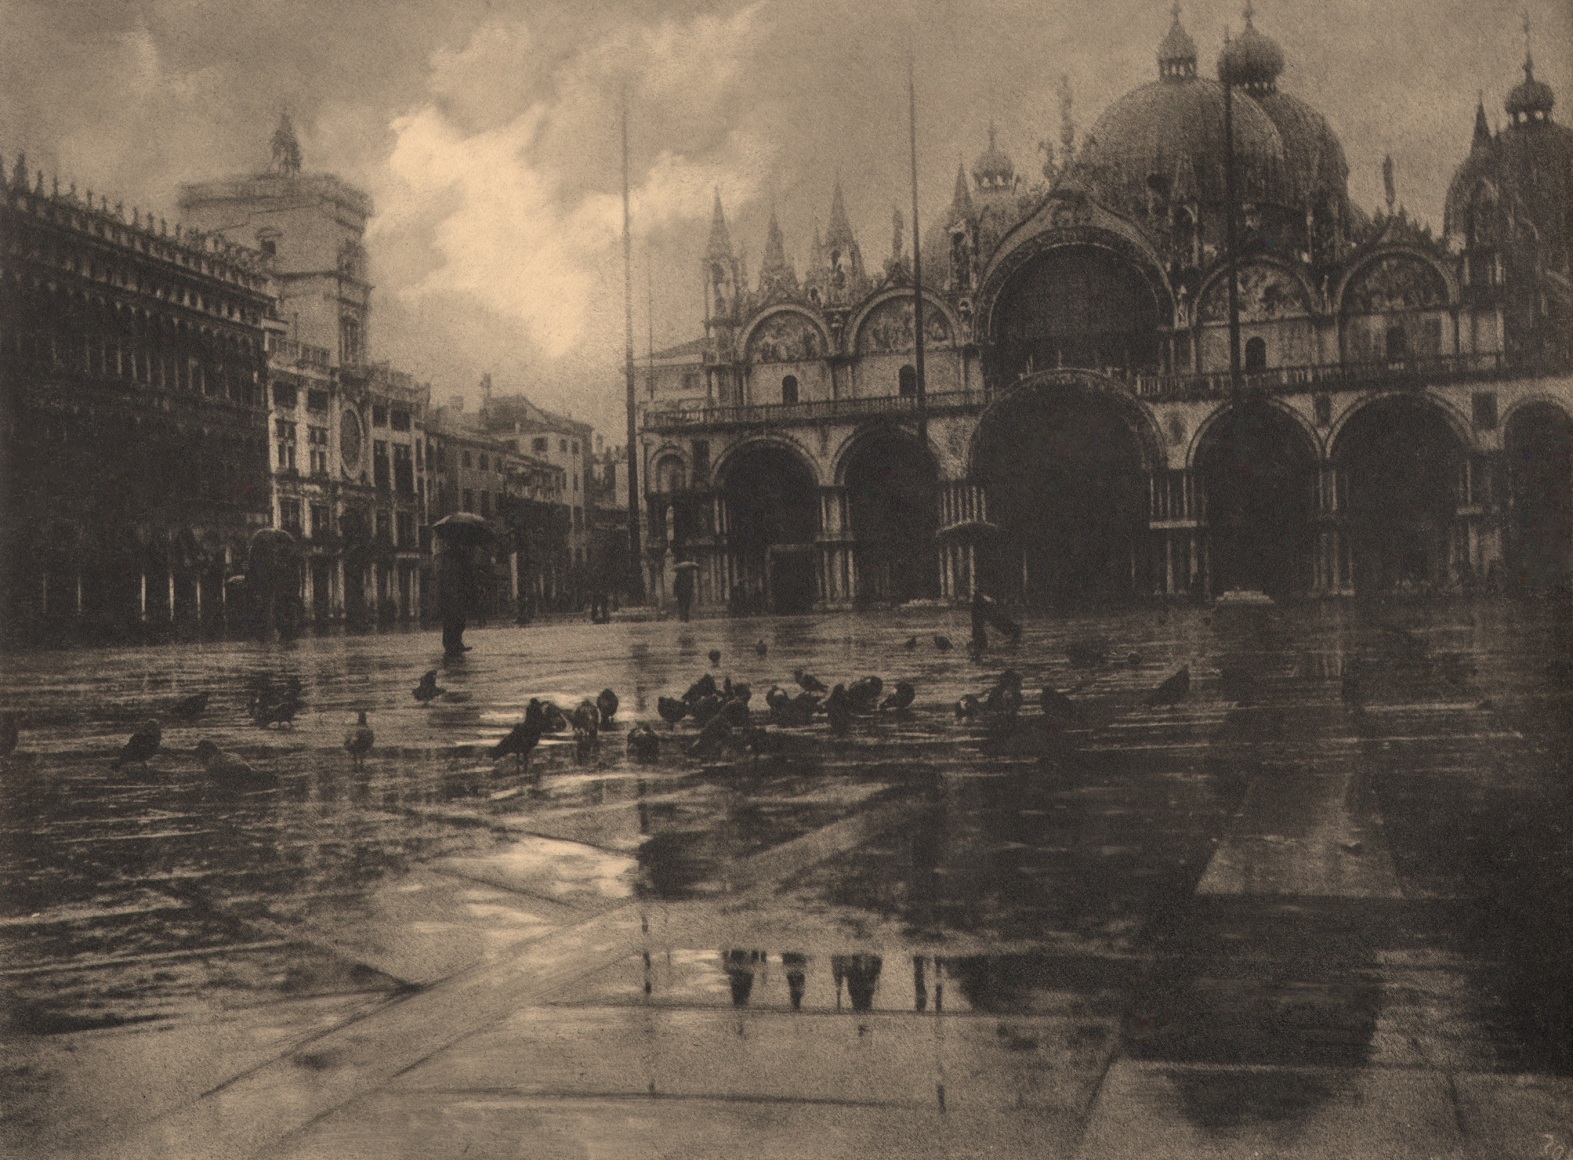 32. L&eacute;onard Misonne, Pluie Venise, 1936. Italian square with wet pavement and pigeons, ornate buildings in the background. Sepia-toned print.